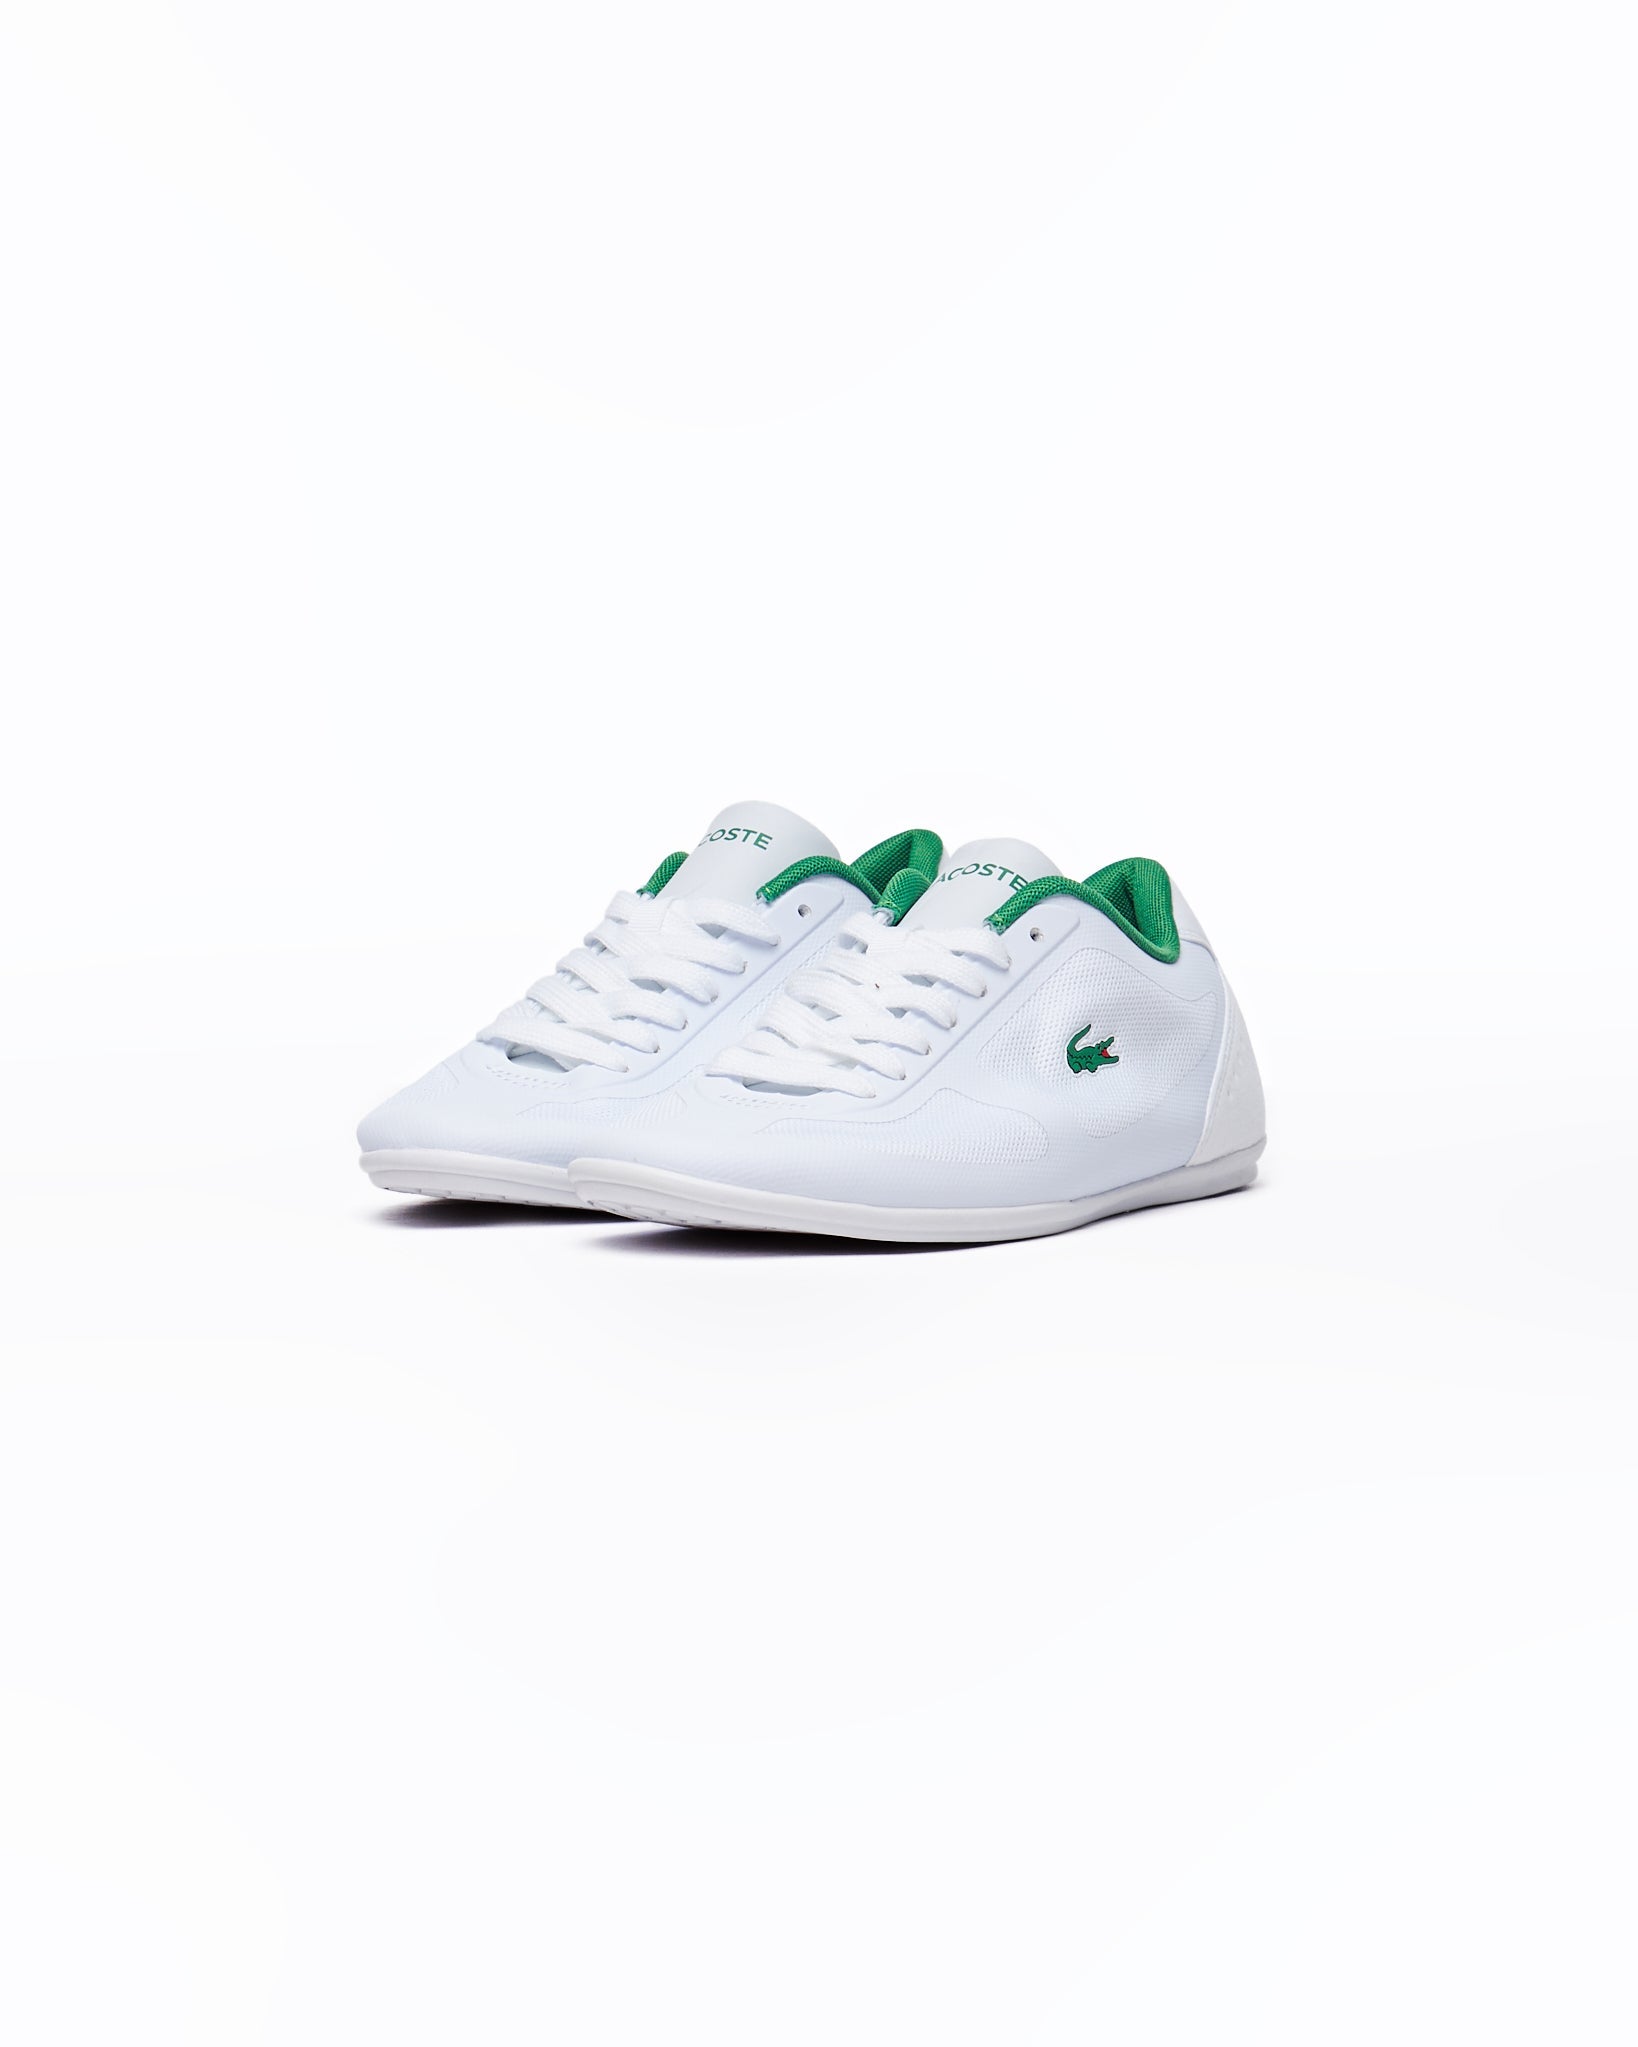 MOI OUTFIT-LAC Men White Sneakers Shoes 30.90